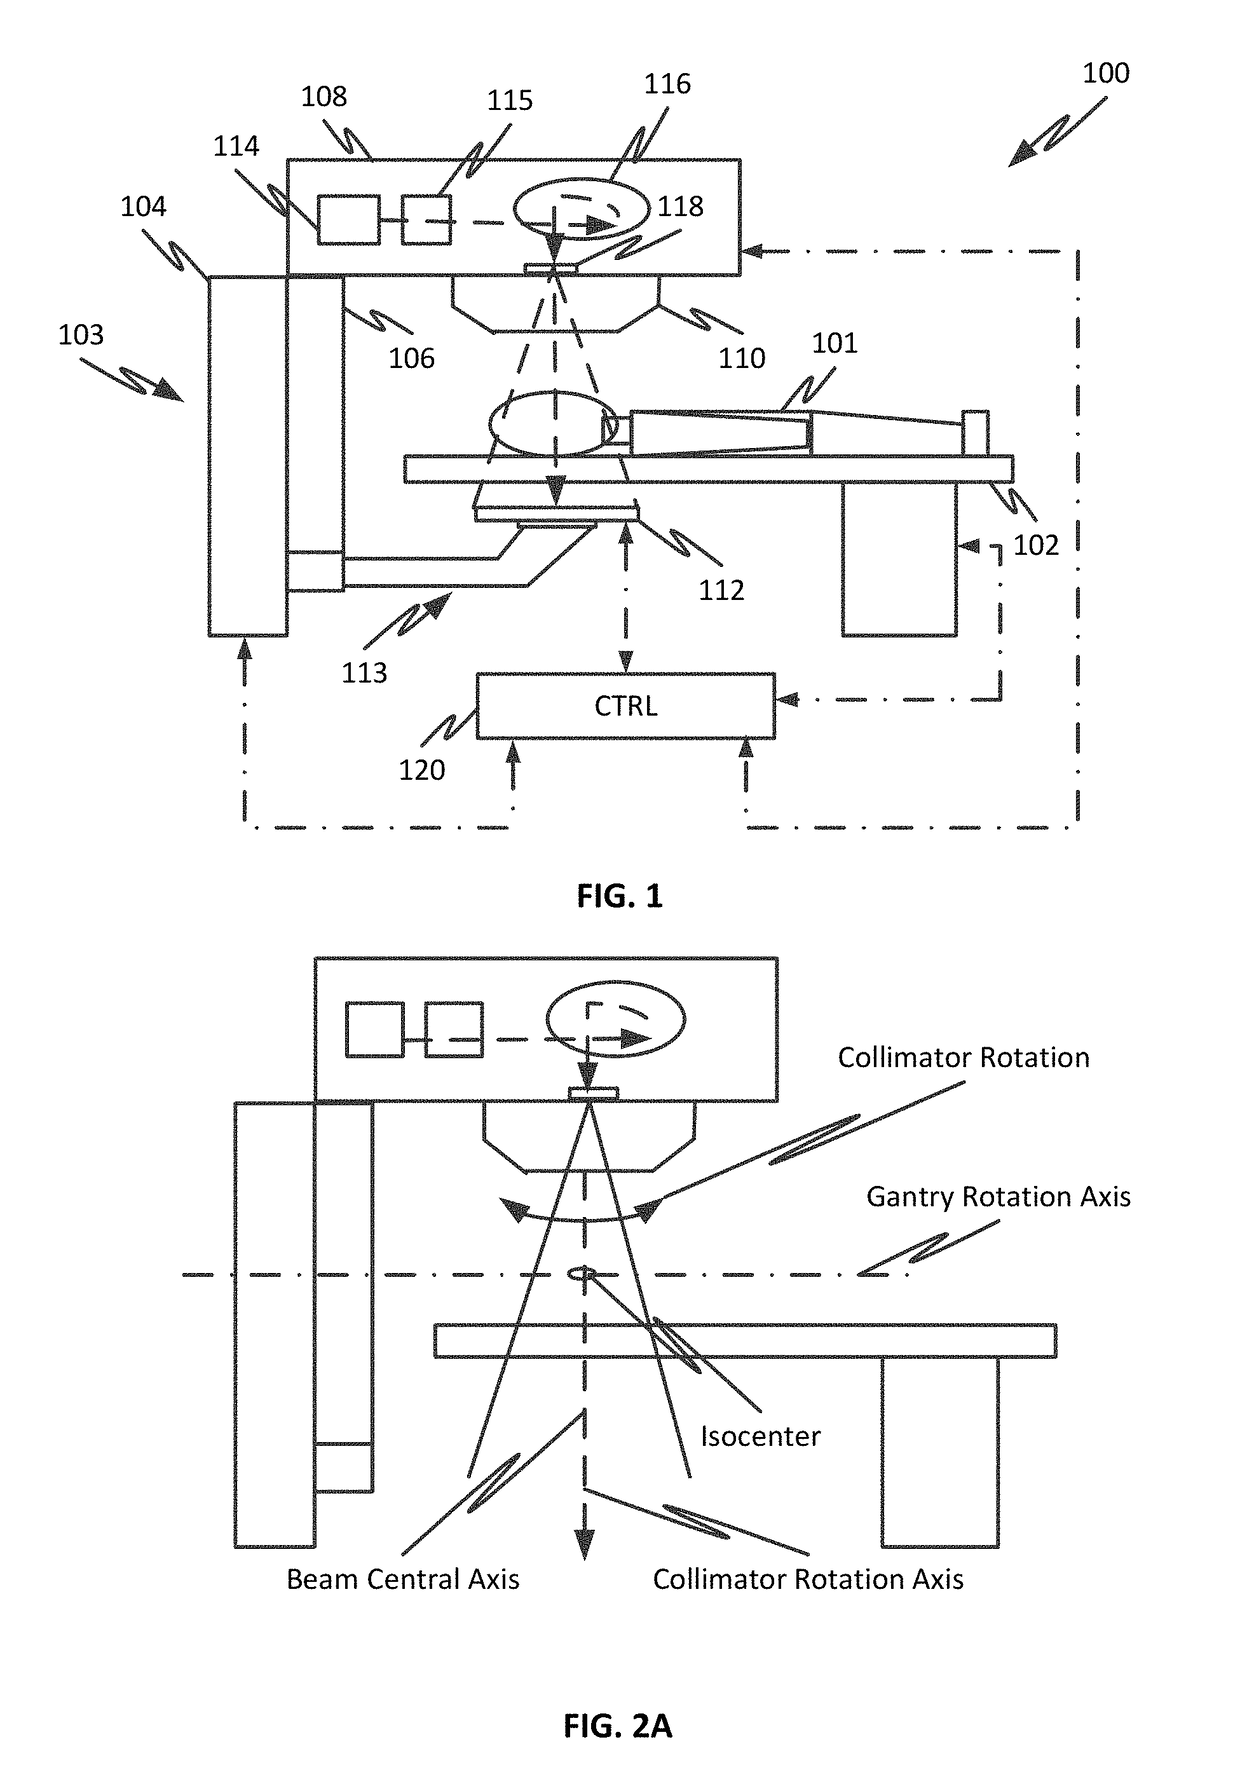 Systems, methods, and devices for radiation beam asymmetry measurements using electronic portal imaging devices